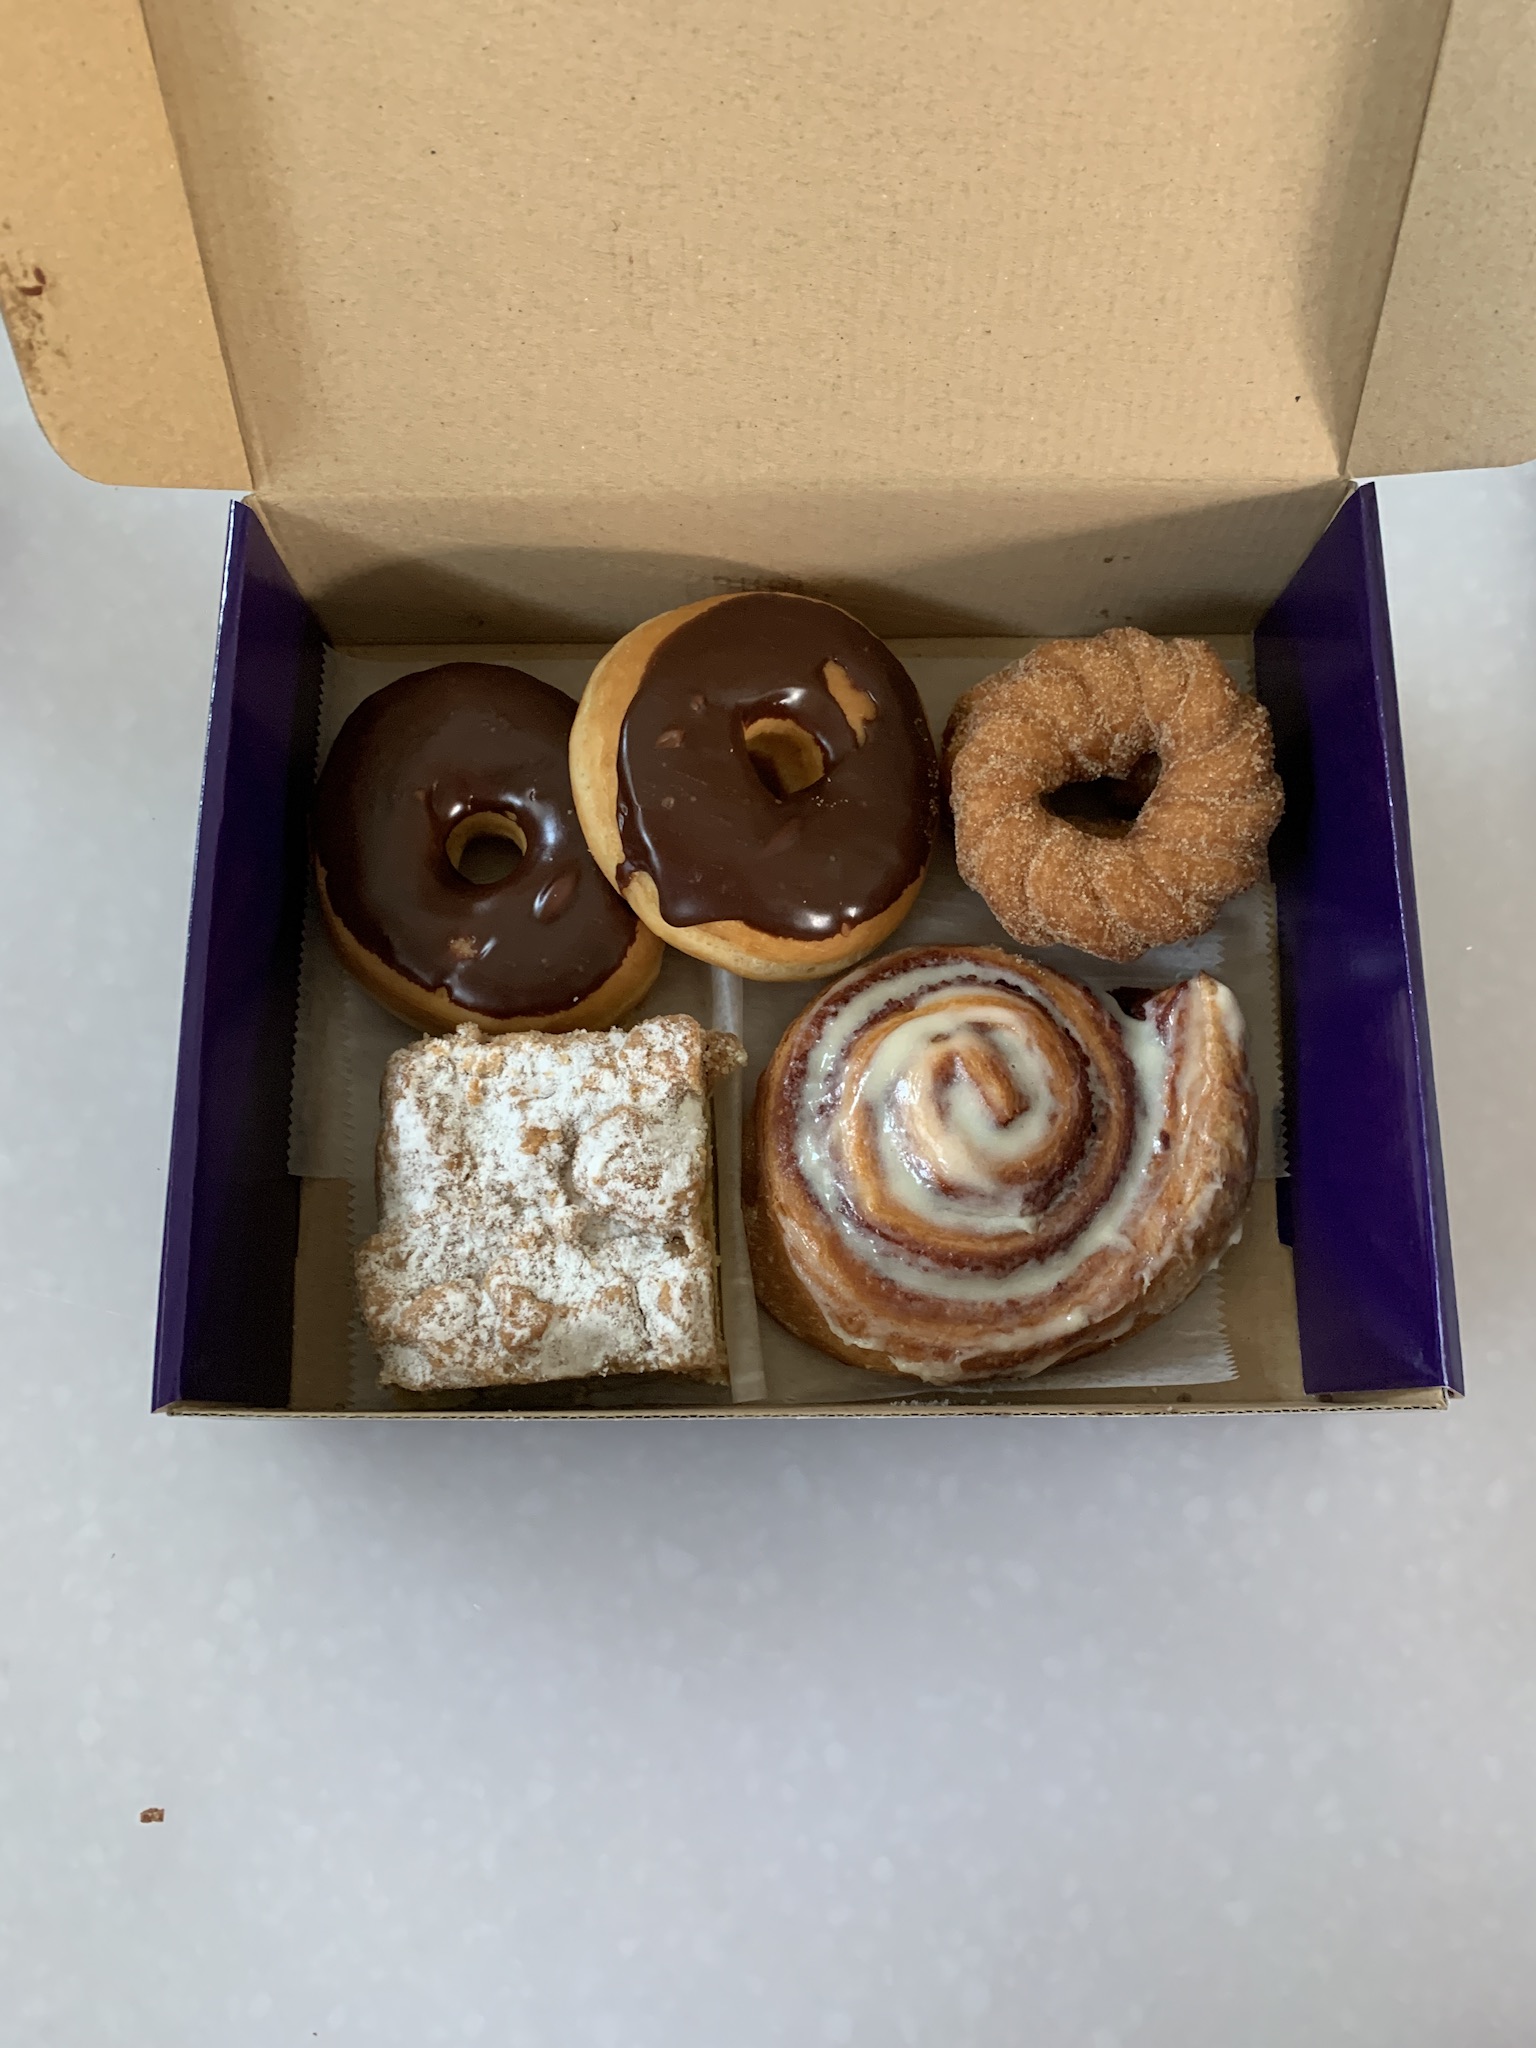 Breakfast pastry and donuts from Coastal Baking Co in Cape Charles VA